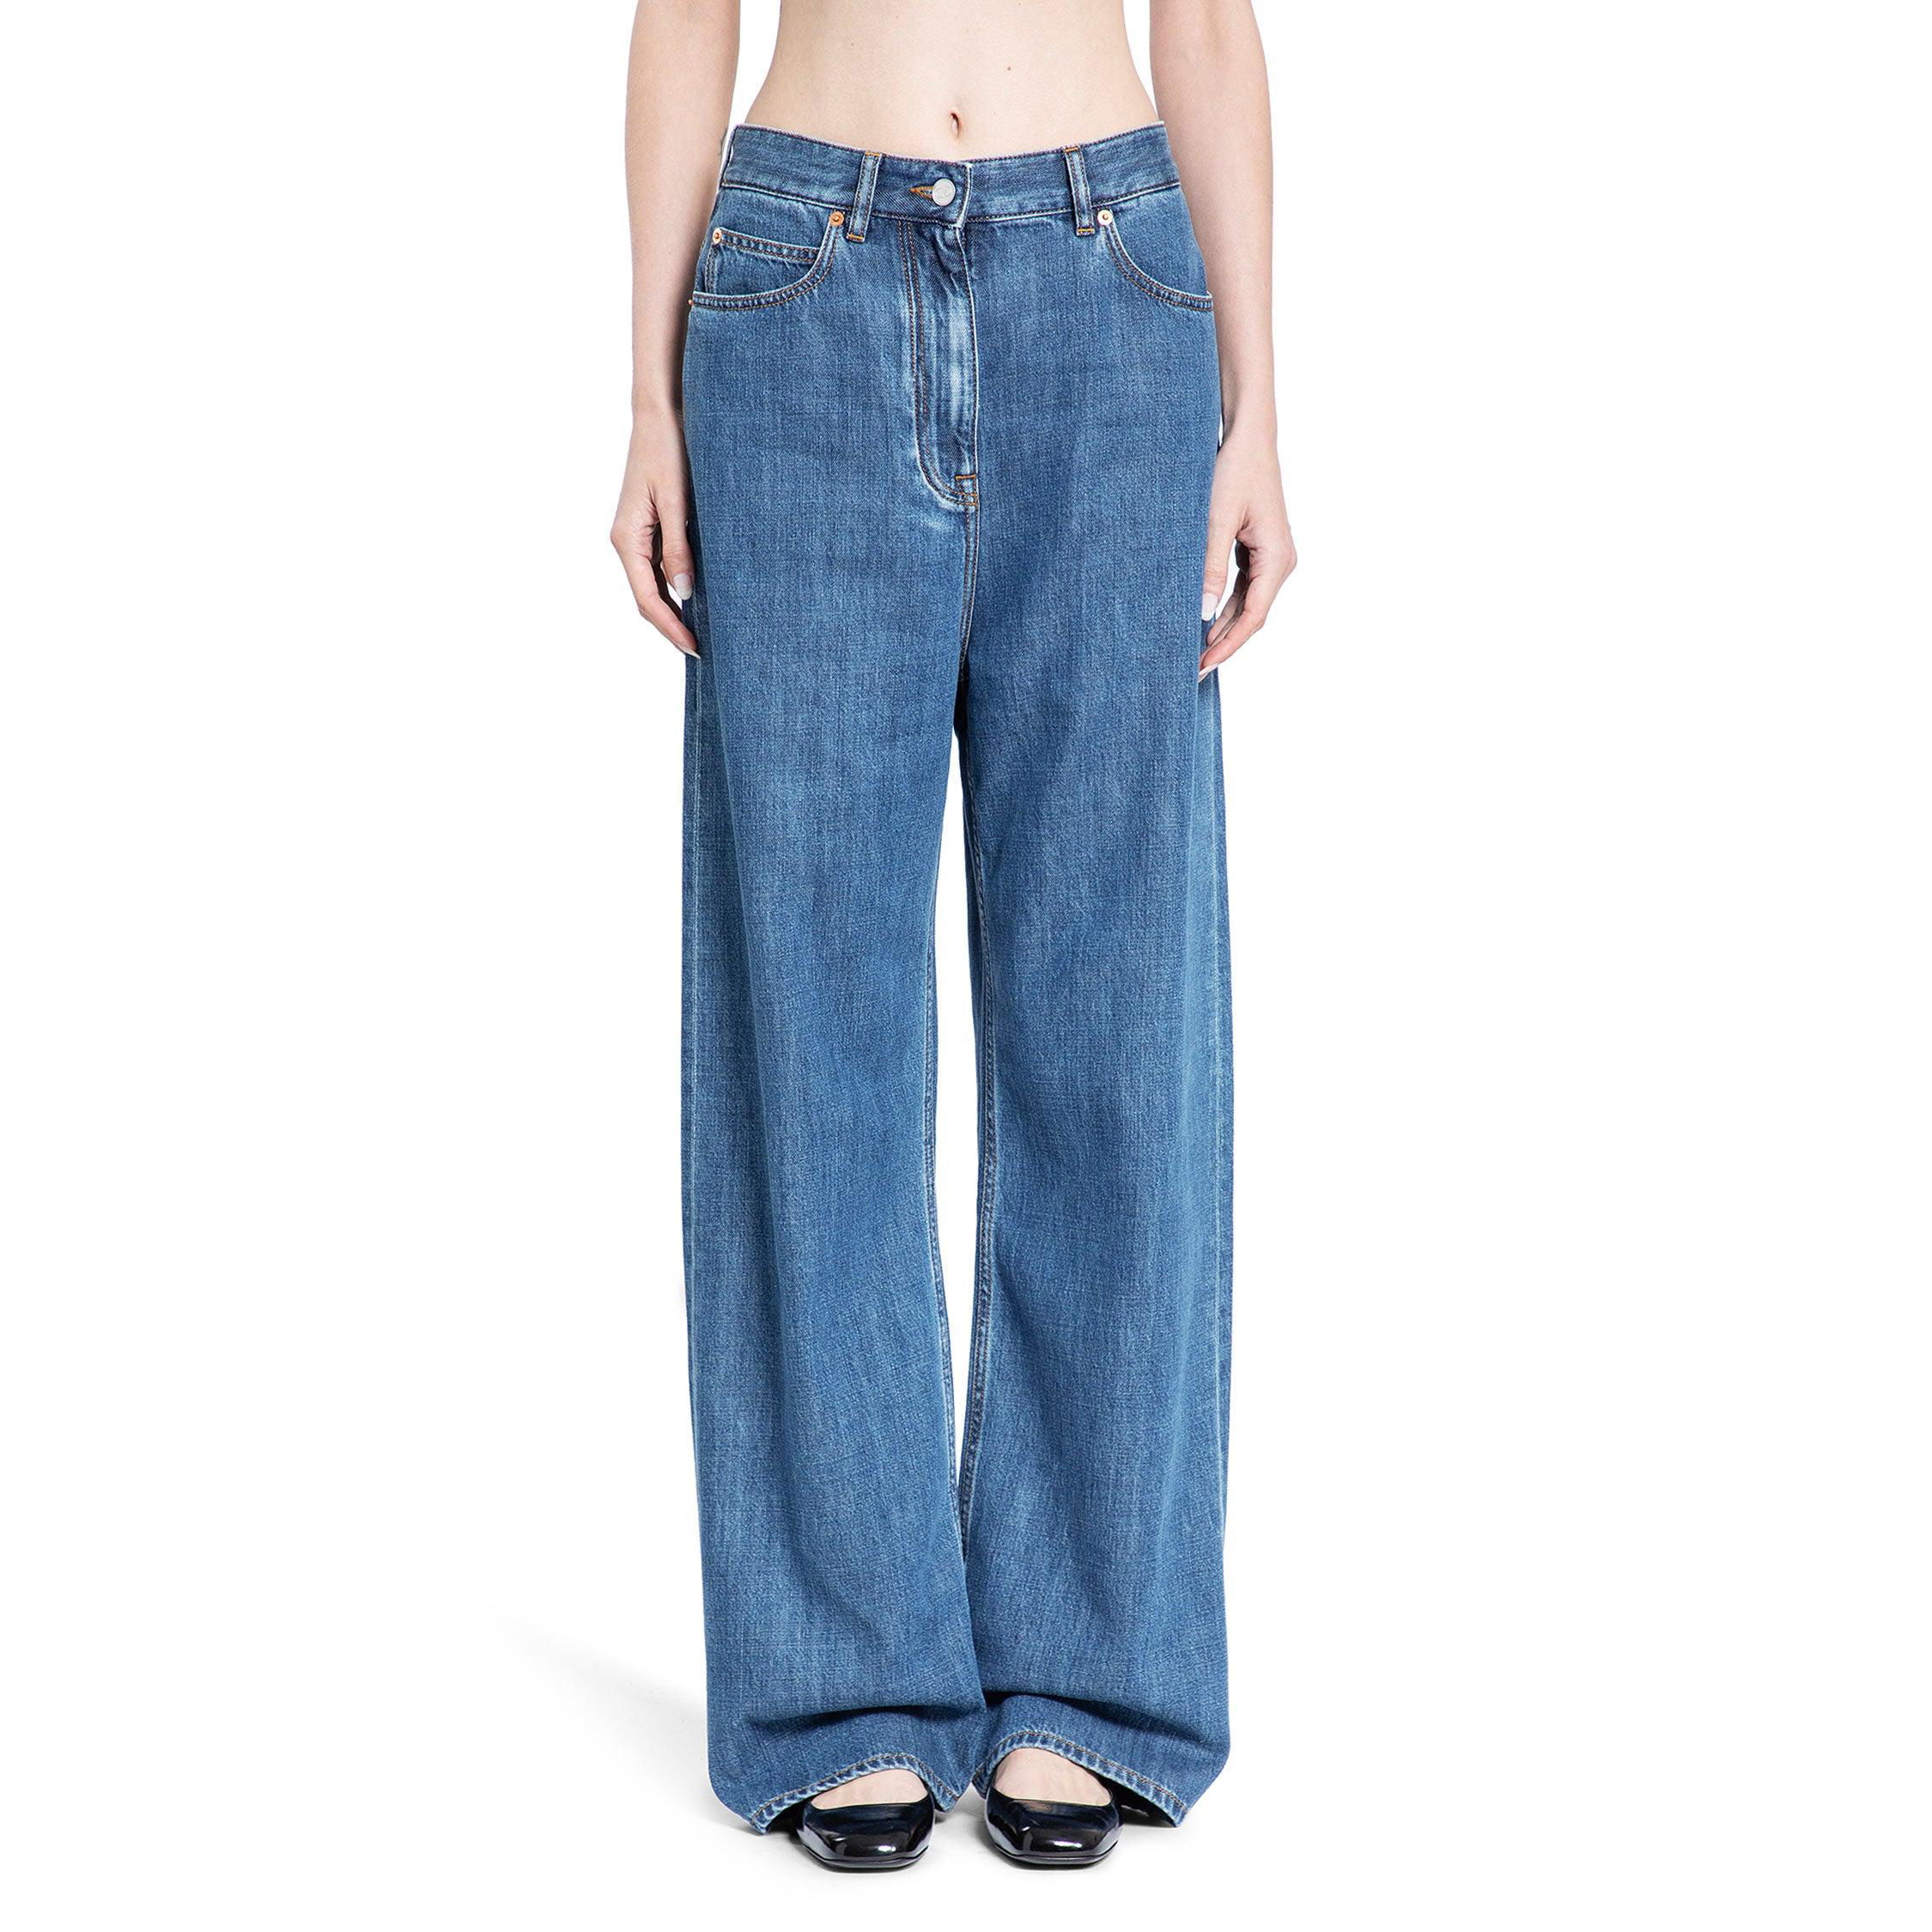 VALENTINO WOMAN BLUE JEANS by VALENTINO